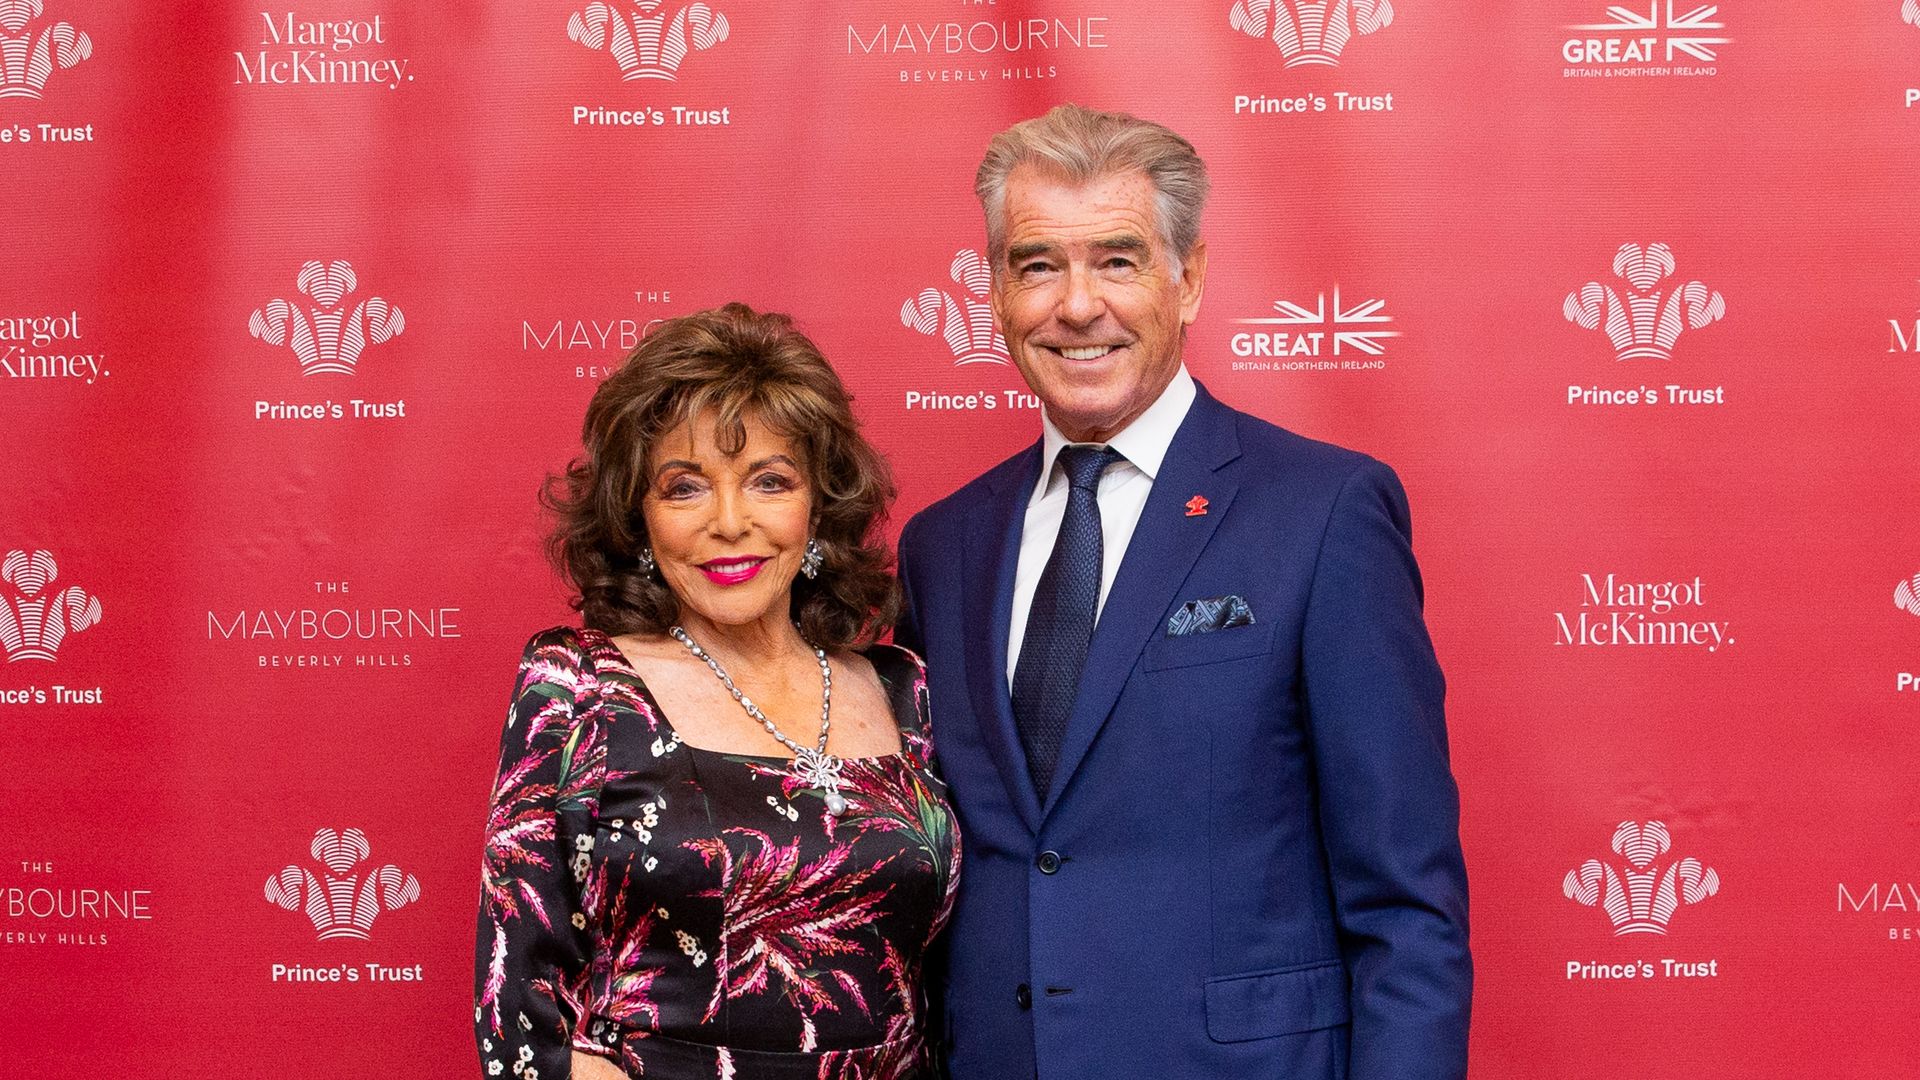 Pierce Brosnan makes striking appearance with Joan Collins to event close to his heart